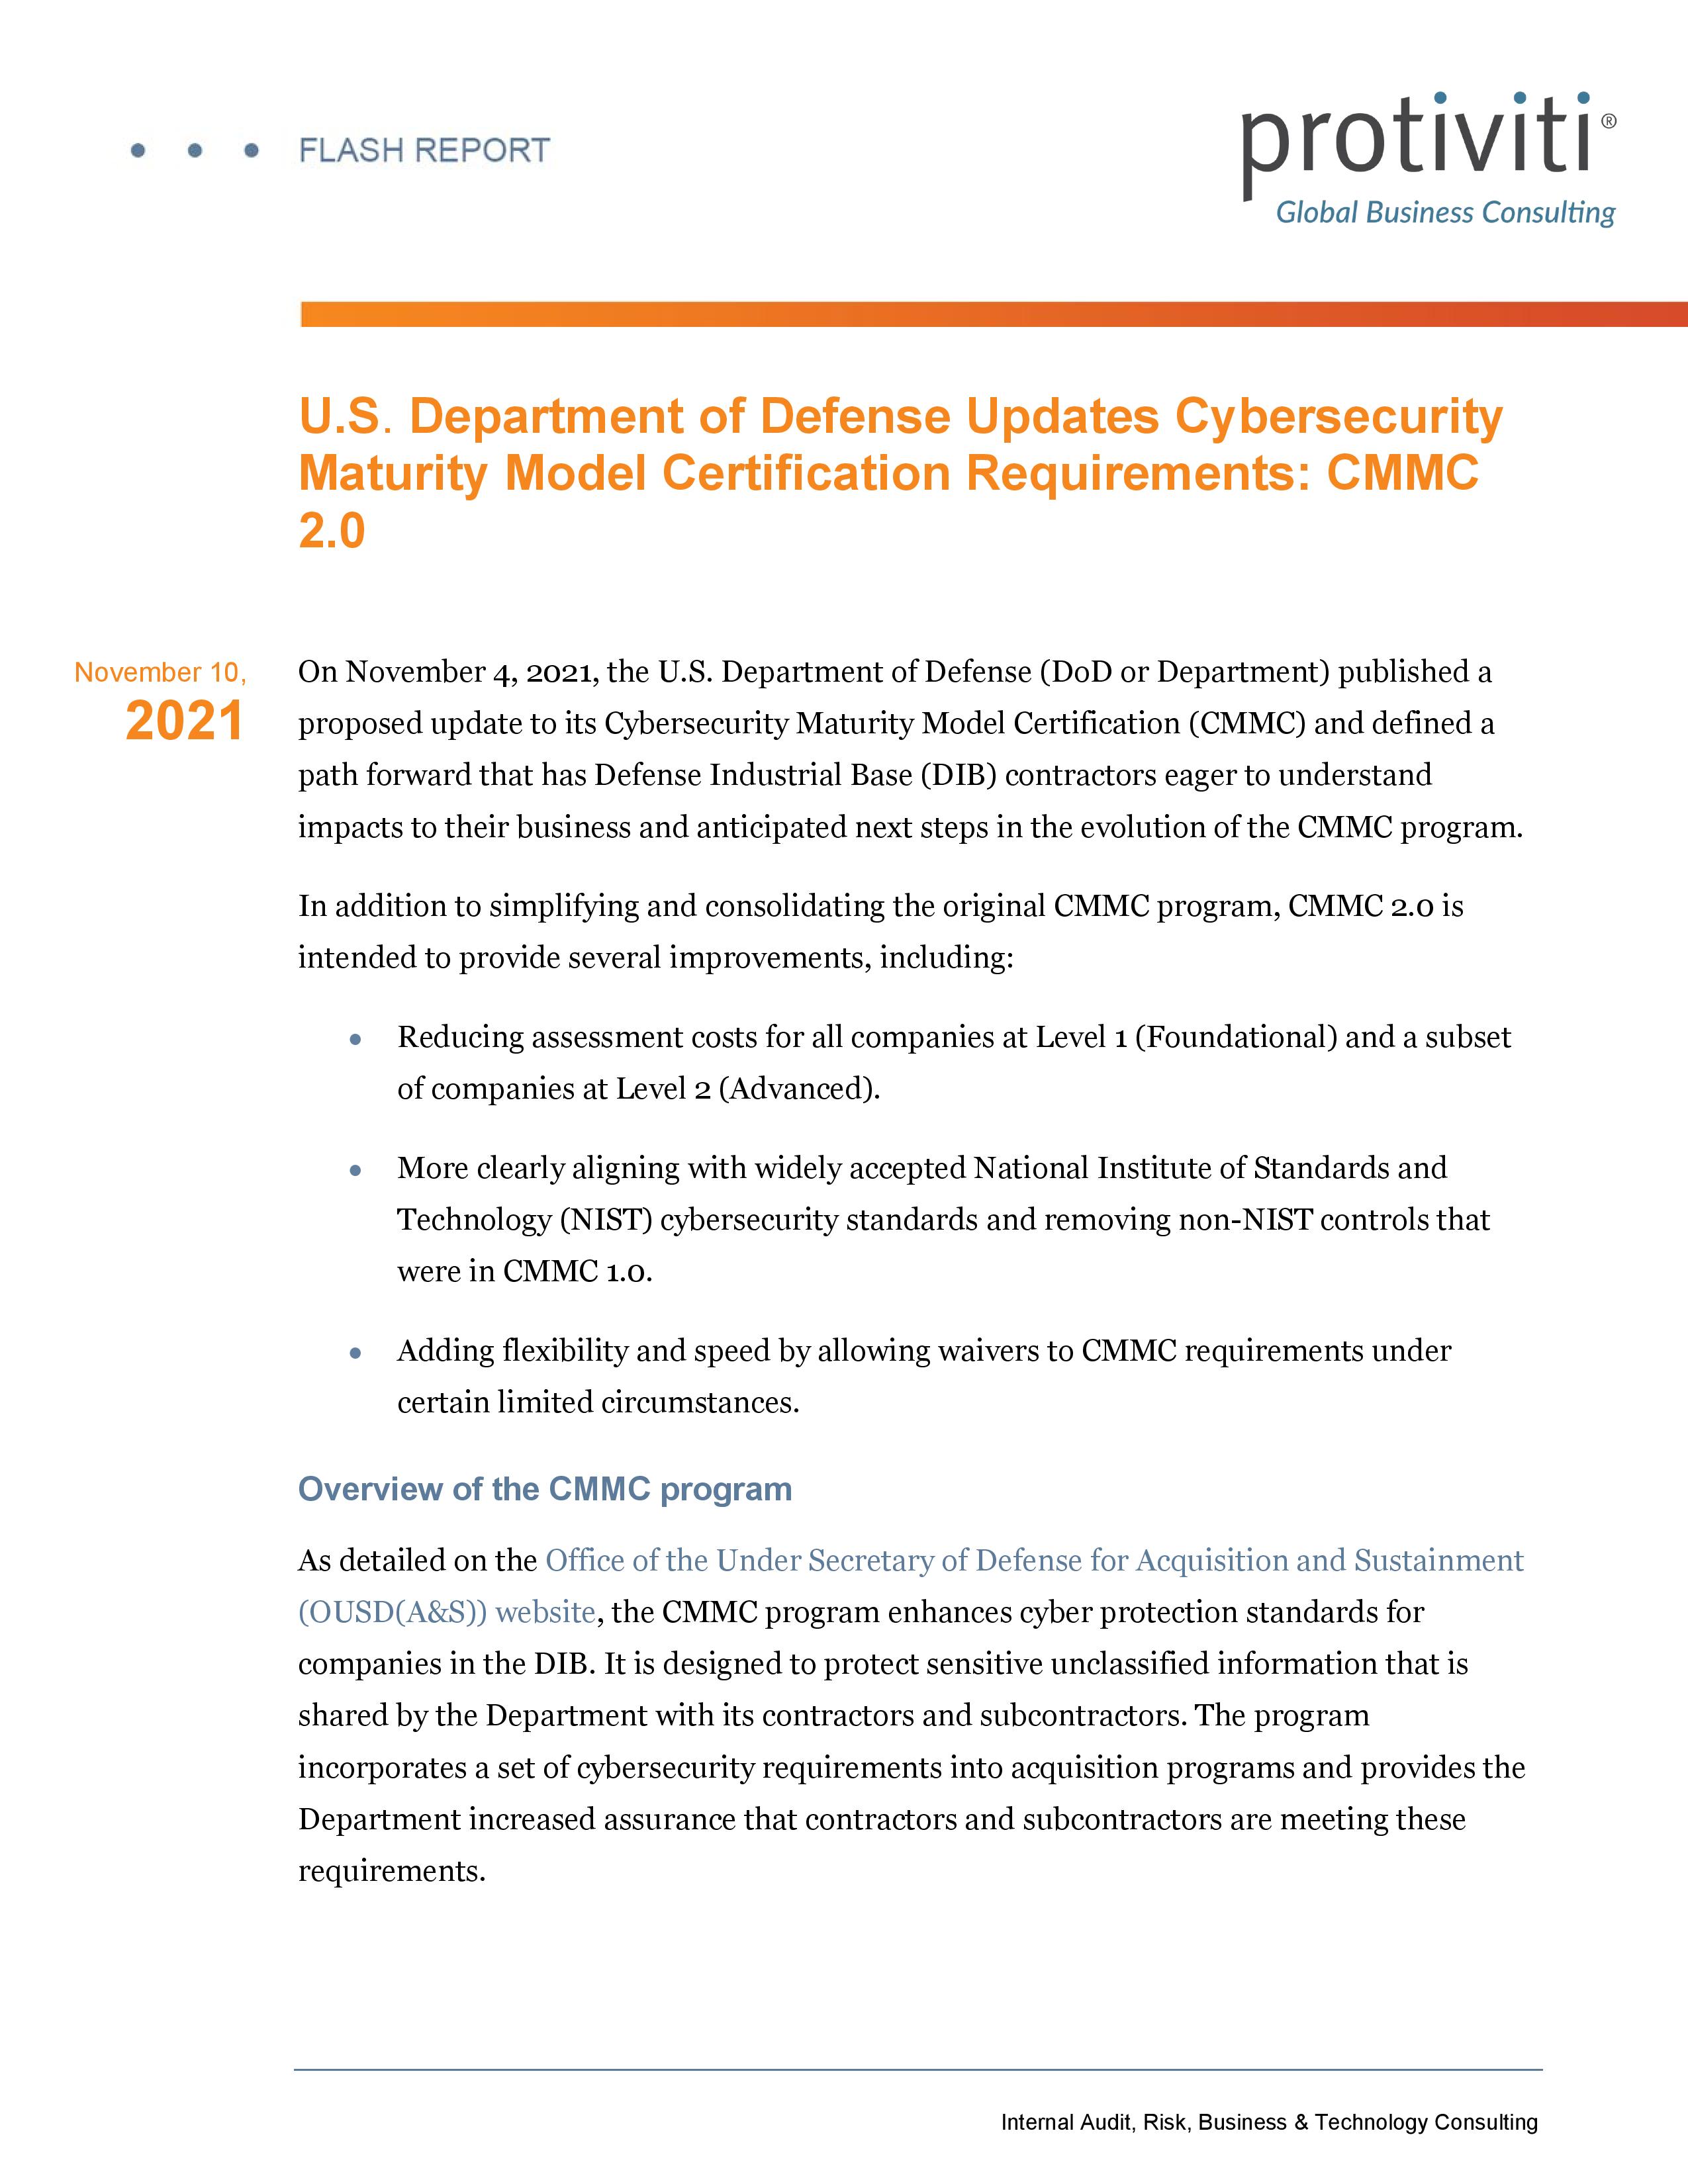 Screenshot of the first page of protiviti-flash-report-cmmc-2.0_0 - U.S. Department of Defense Updates Cybersecurity-page-001